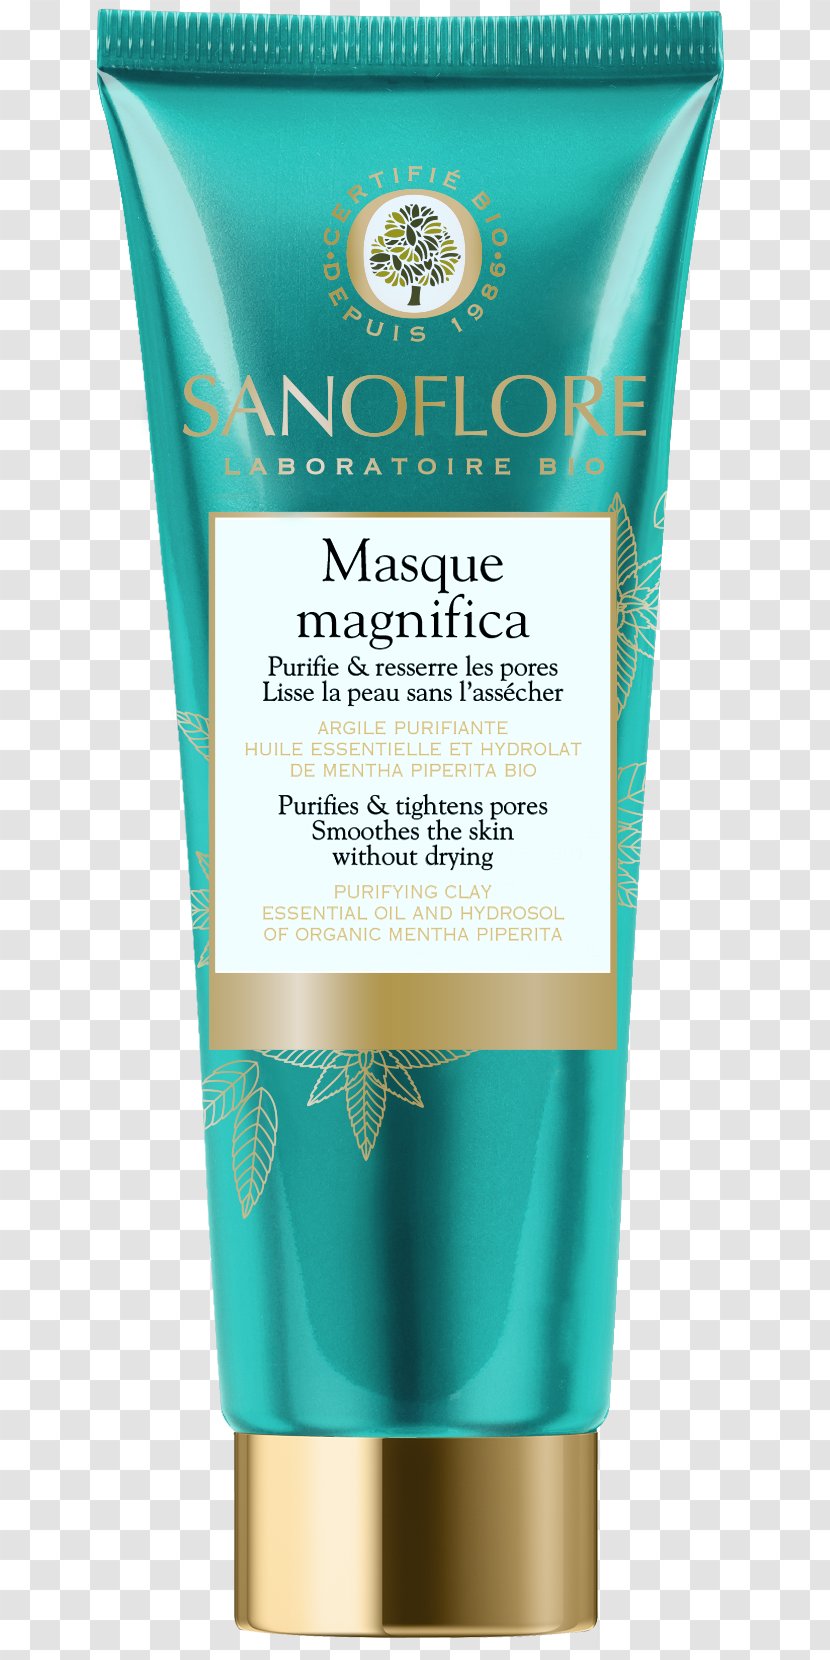 Cream Lotion Sunscreen Product - Skin Care - Madame Masque Transparent PNG